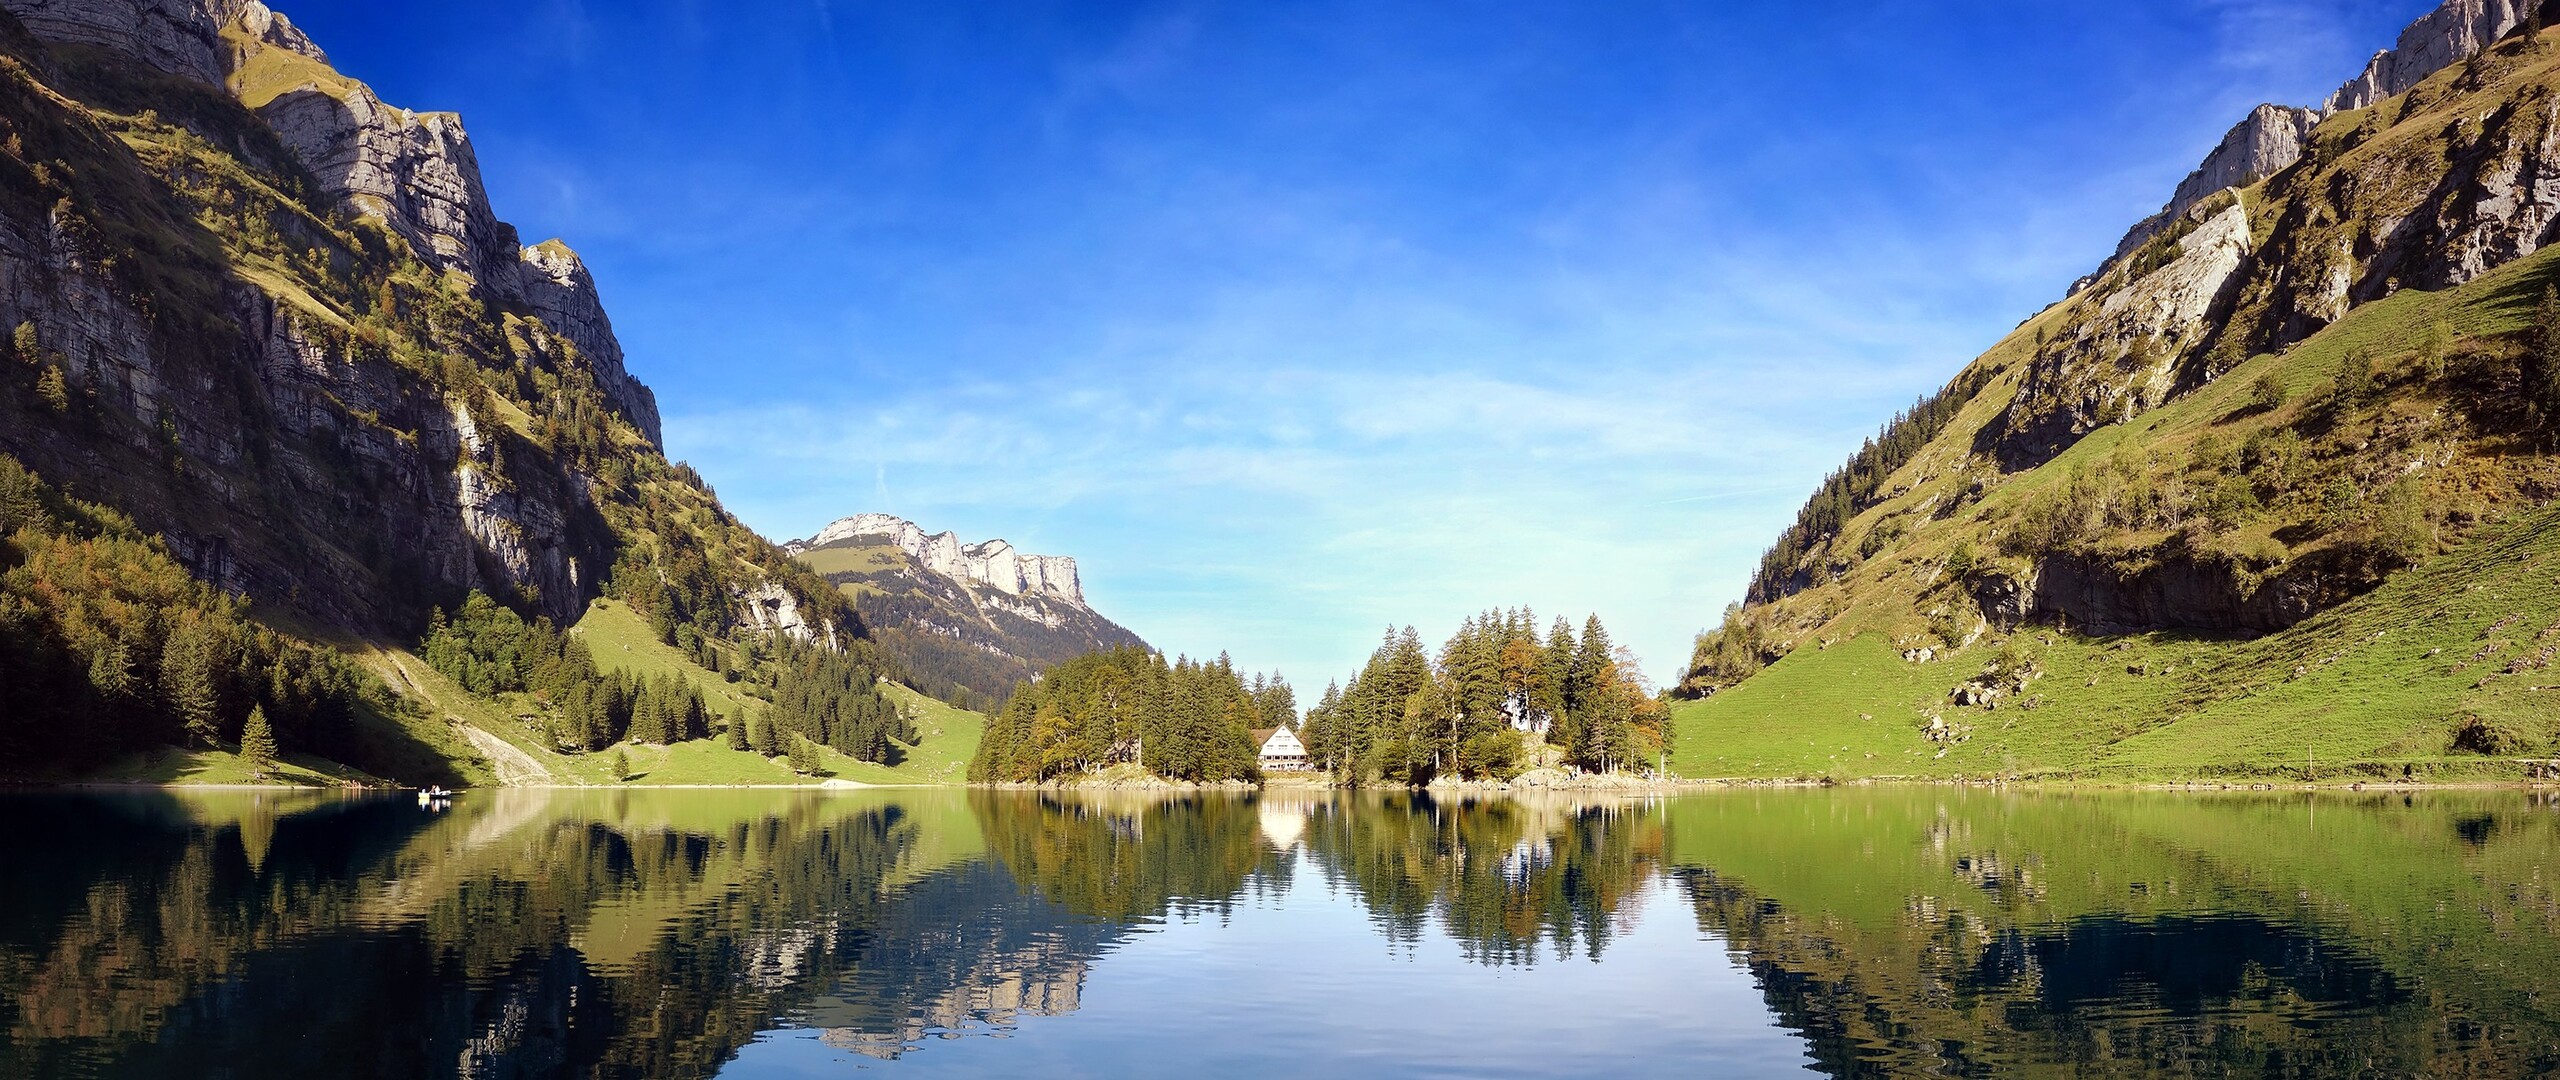 Switzerland In Summer 2560x1080 Resolution HD 4k Wallpaper, Image, Background, Photo and Picture